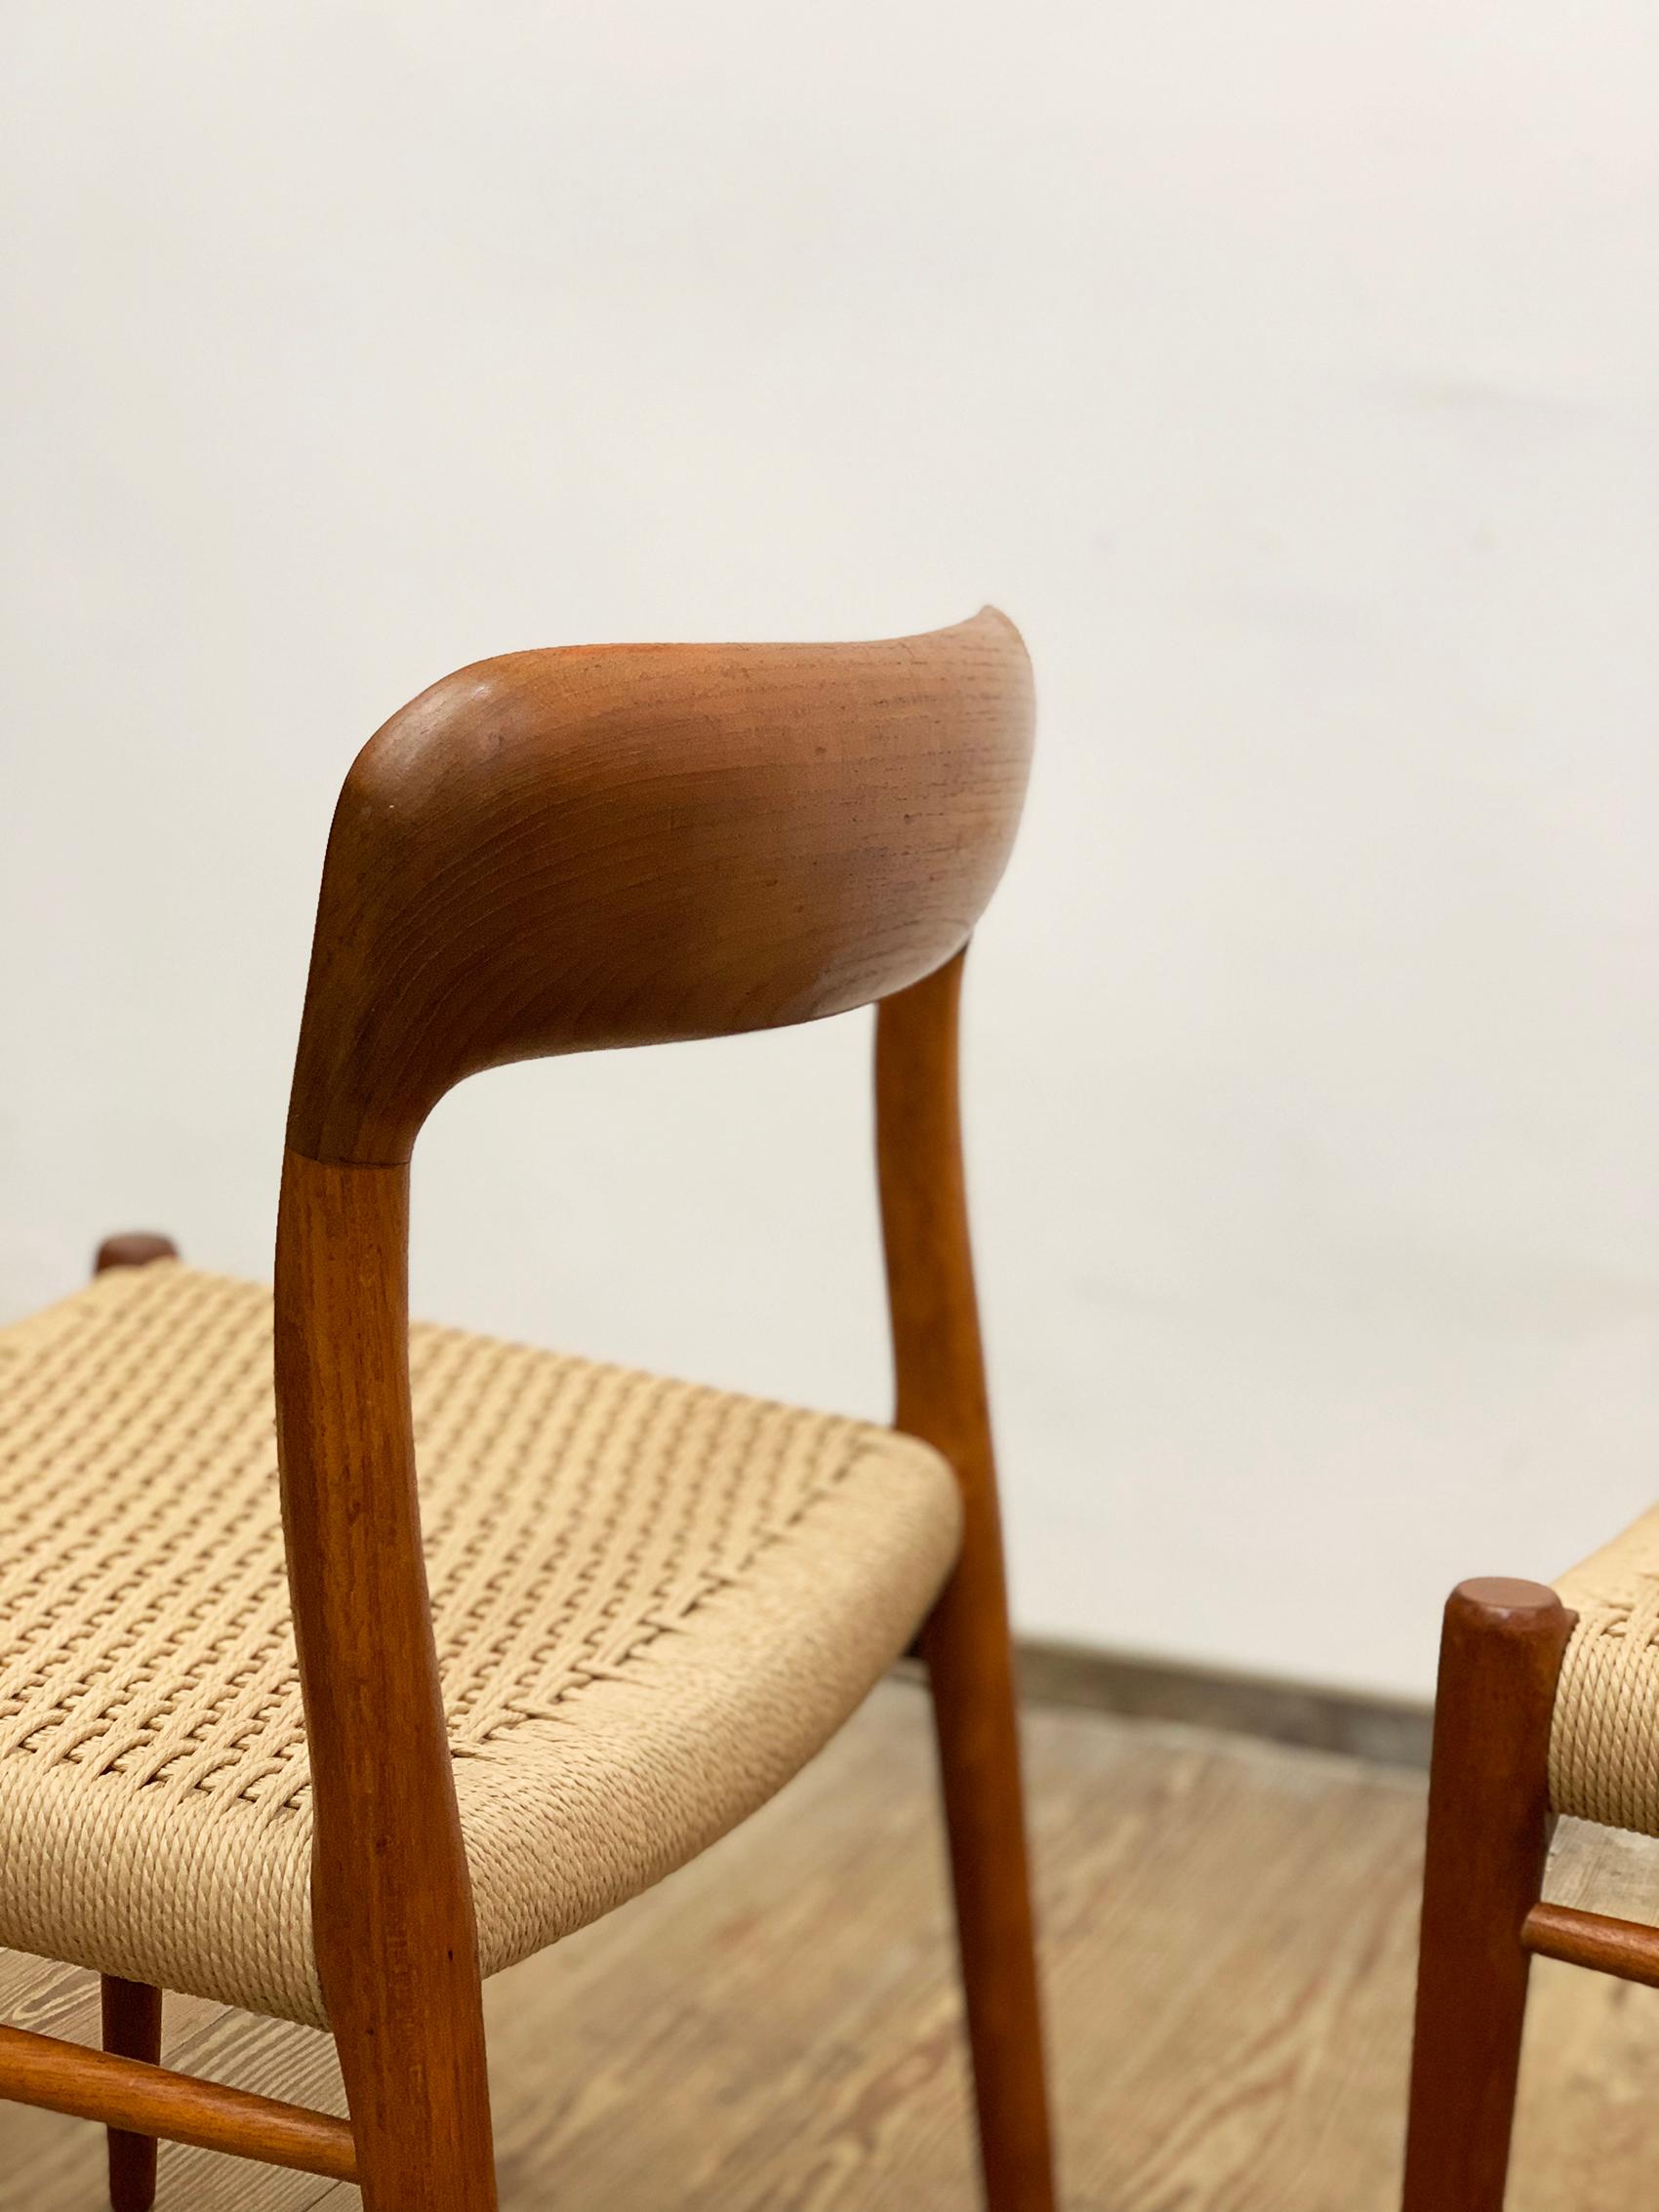 Papercord Midcentury Teak Dining Chairs #75 by Niels O. Møller for J. L. Moller, Set of 8